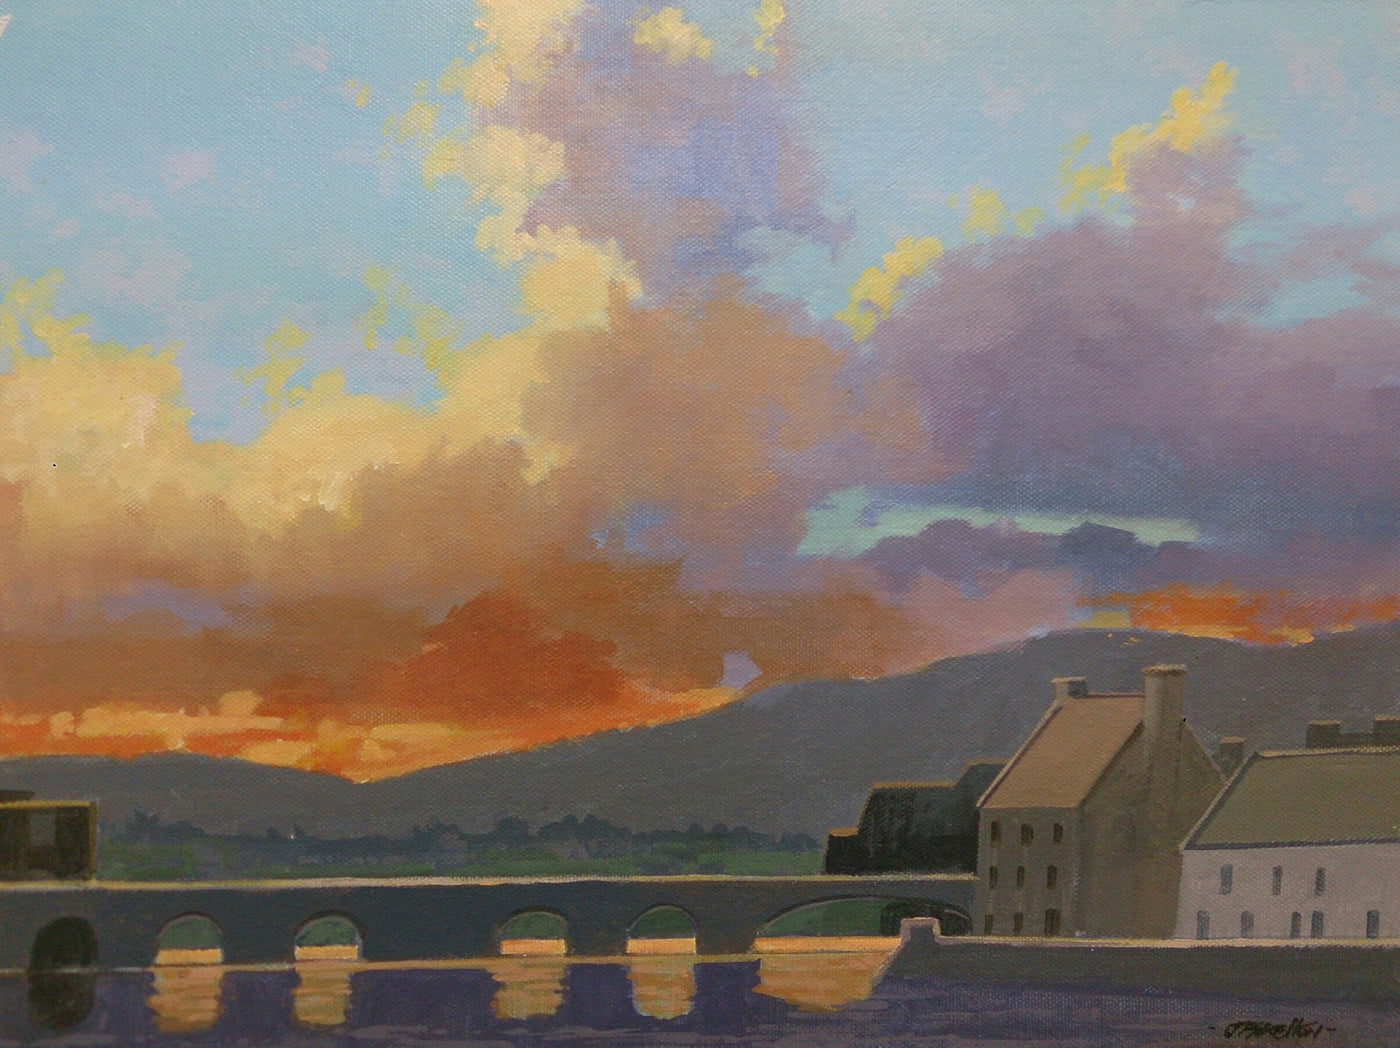 Light Fall Carrick On Suir Tipperary by John F. Skelton - Green Gallery